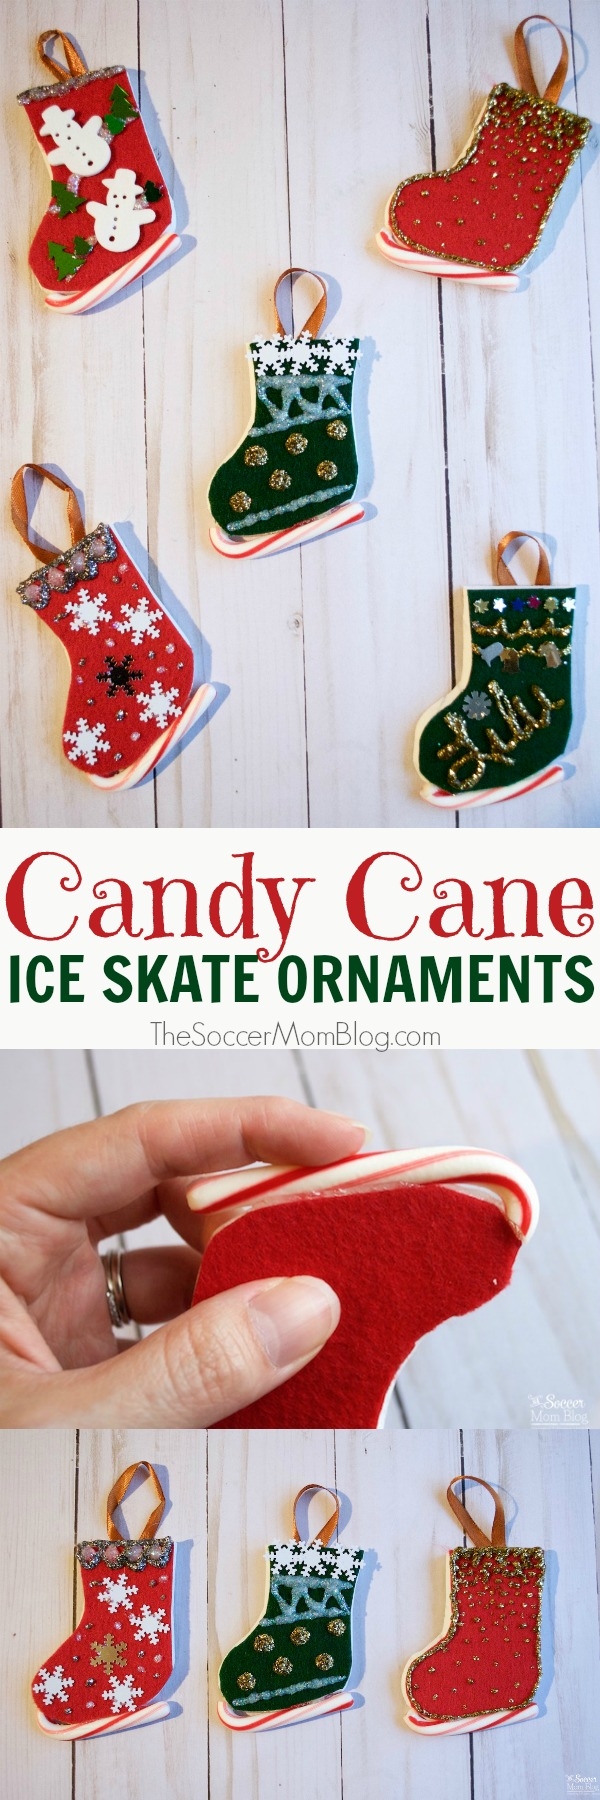 candy-cane-ice-skate-ornaments-pin